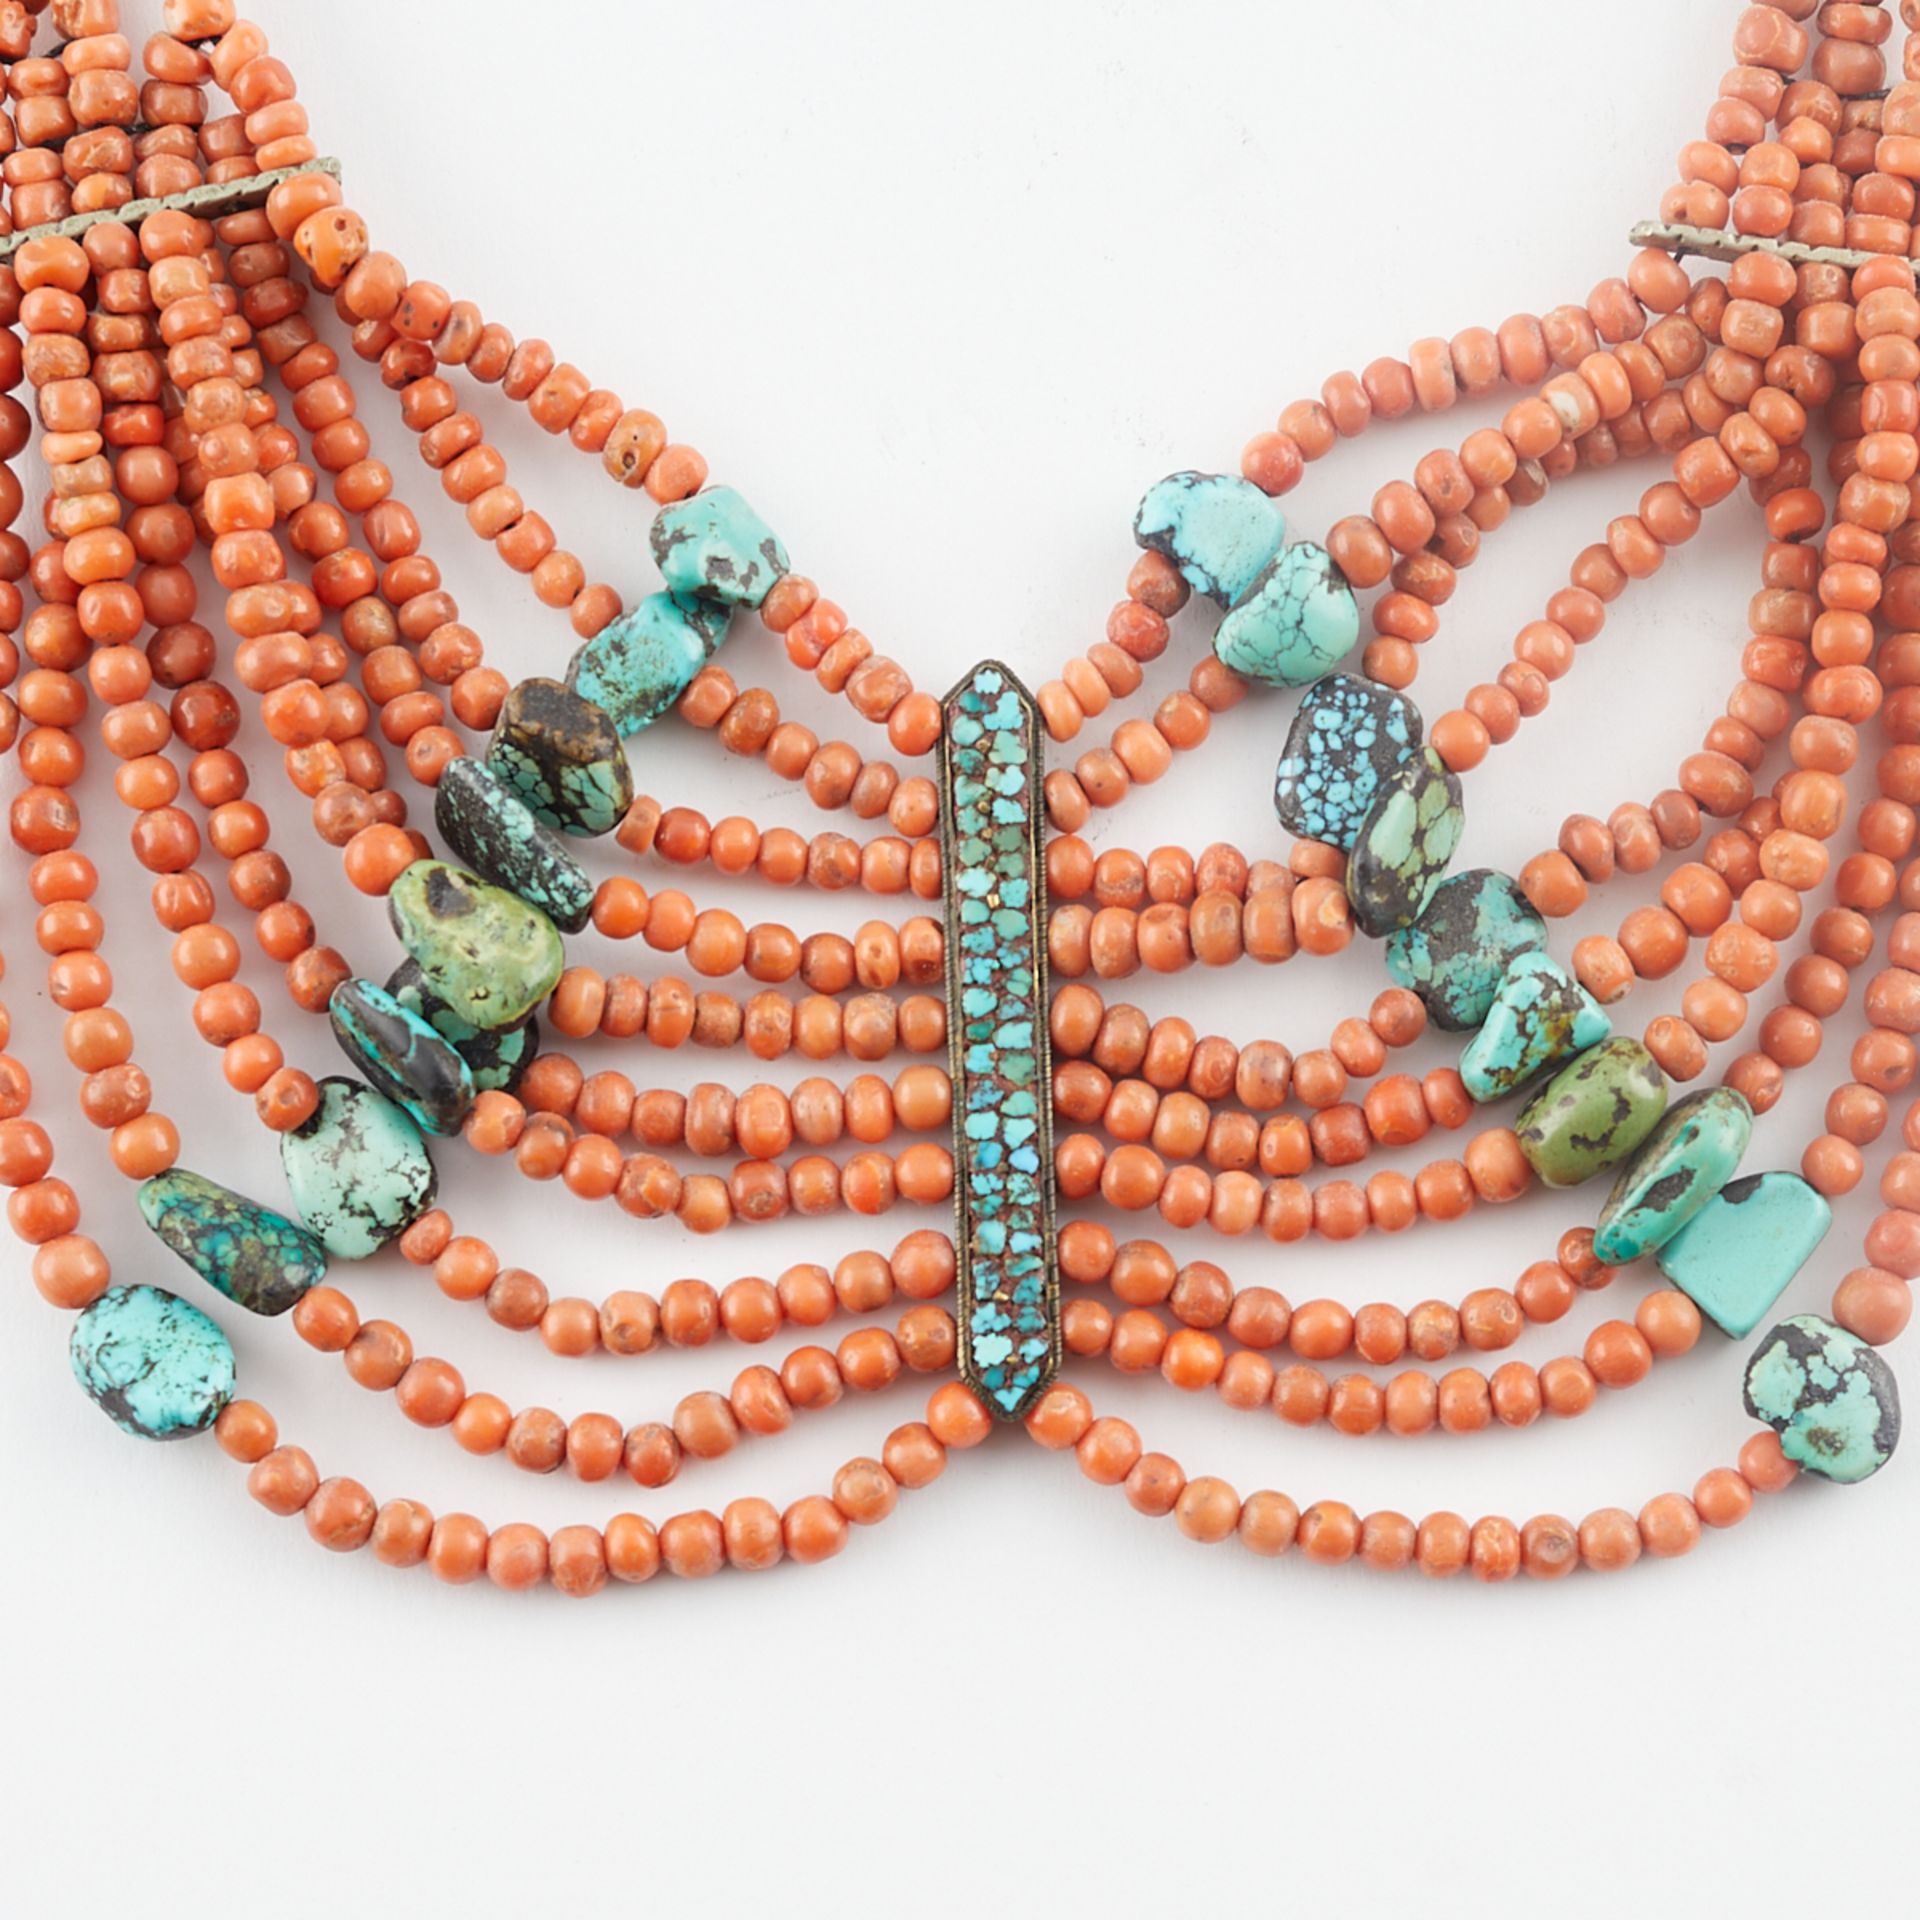 Indian Coral & Turquoise Necklace - Image 5 of 5